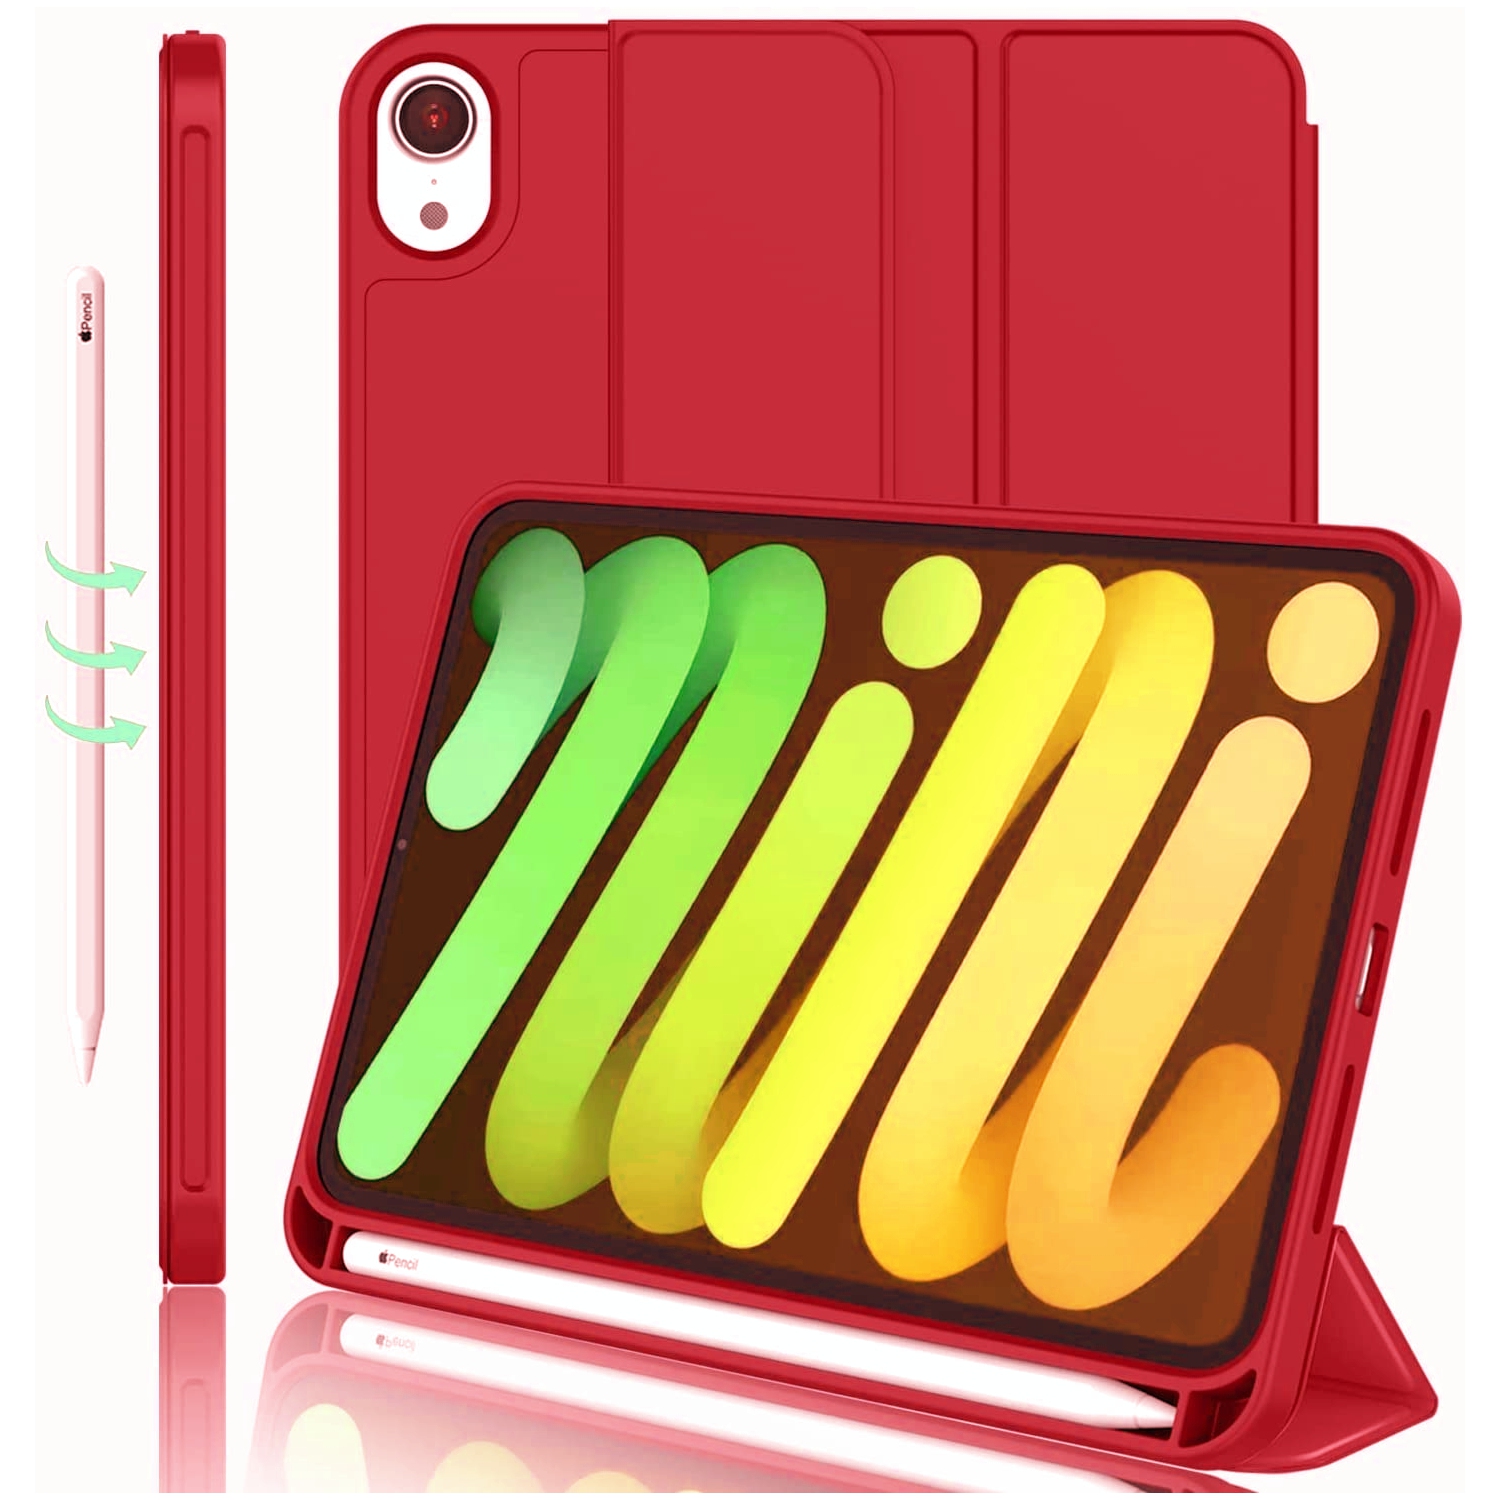 【CSmart】 Slim Magnetic Smart Cover Stand Case & Pencil Holder for iPad Mini 6 6th Gen. 2021 (8.3"), Red